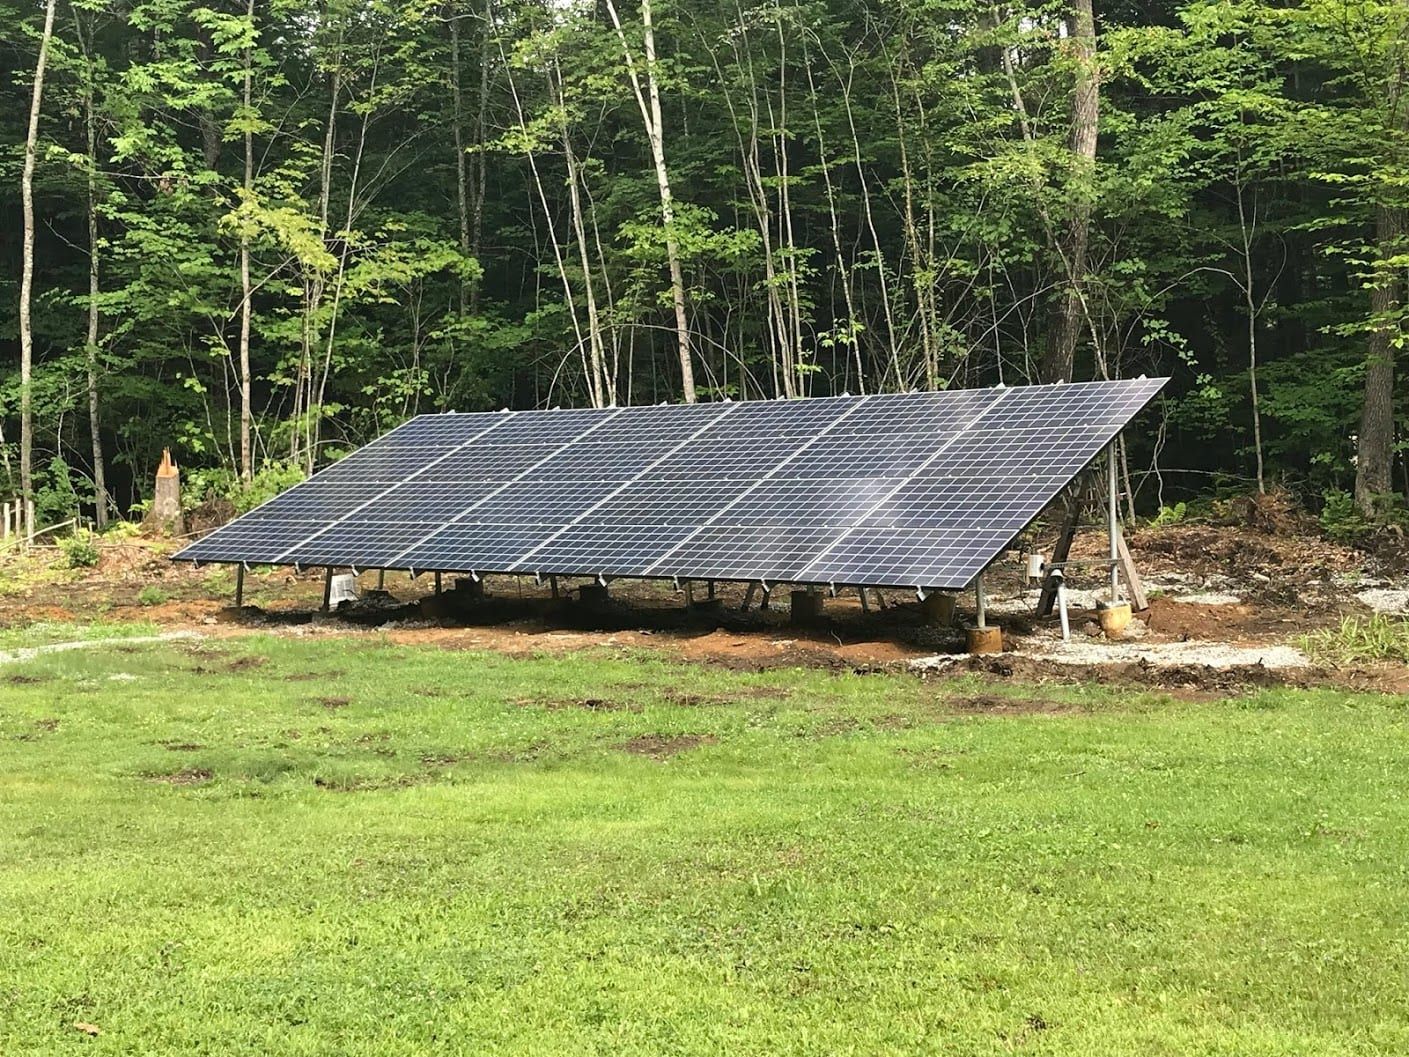 7 Tips for a Successful DIY Ground Mount Solar Project | Unplugged